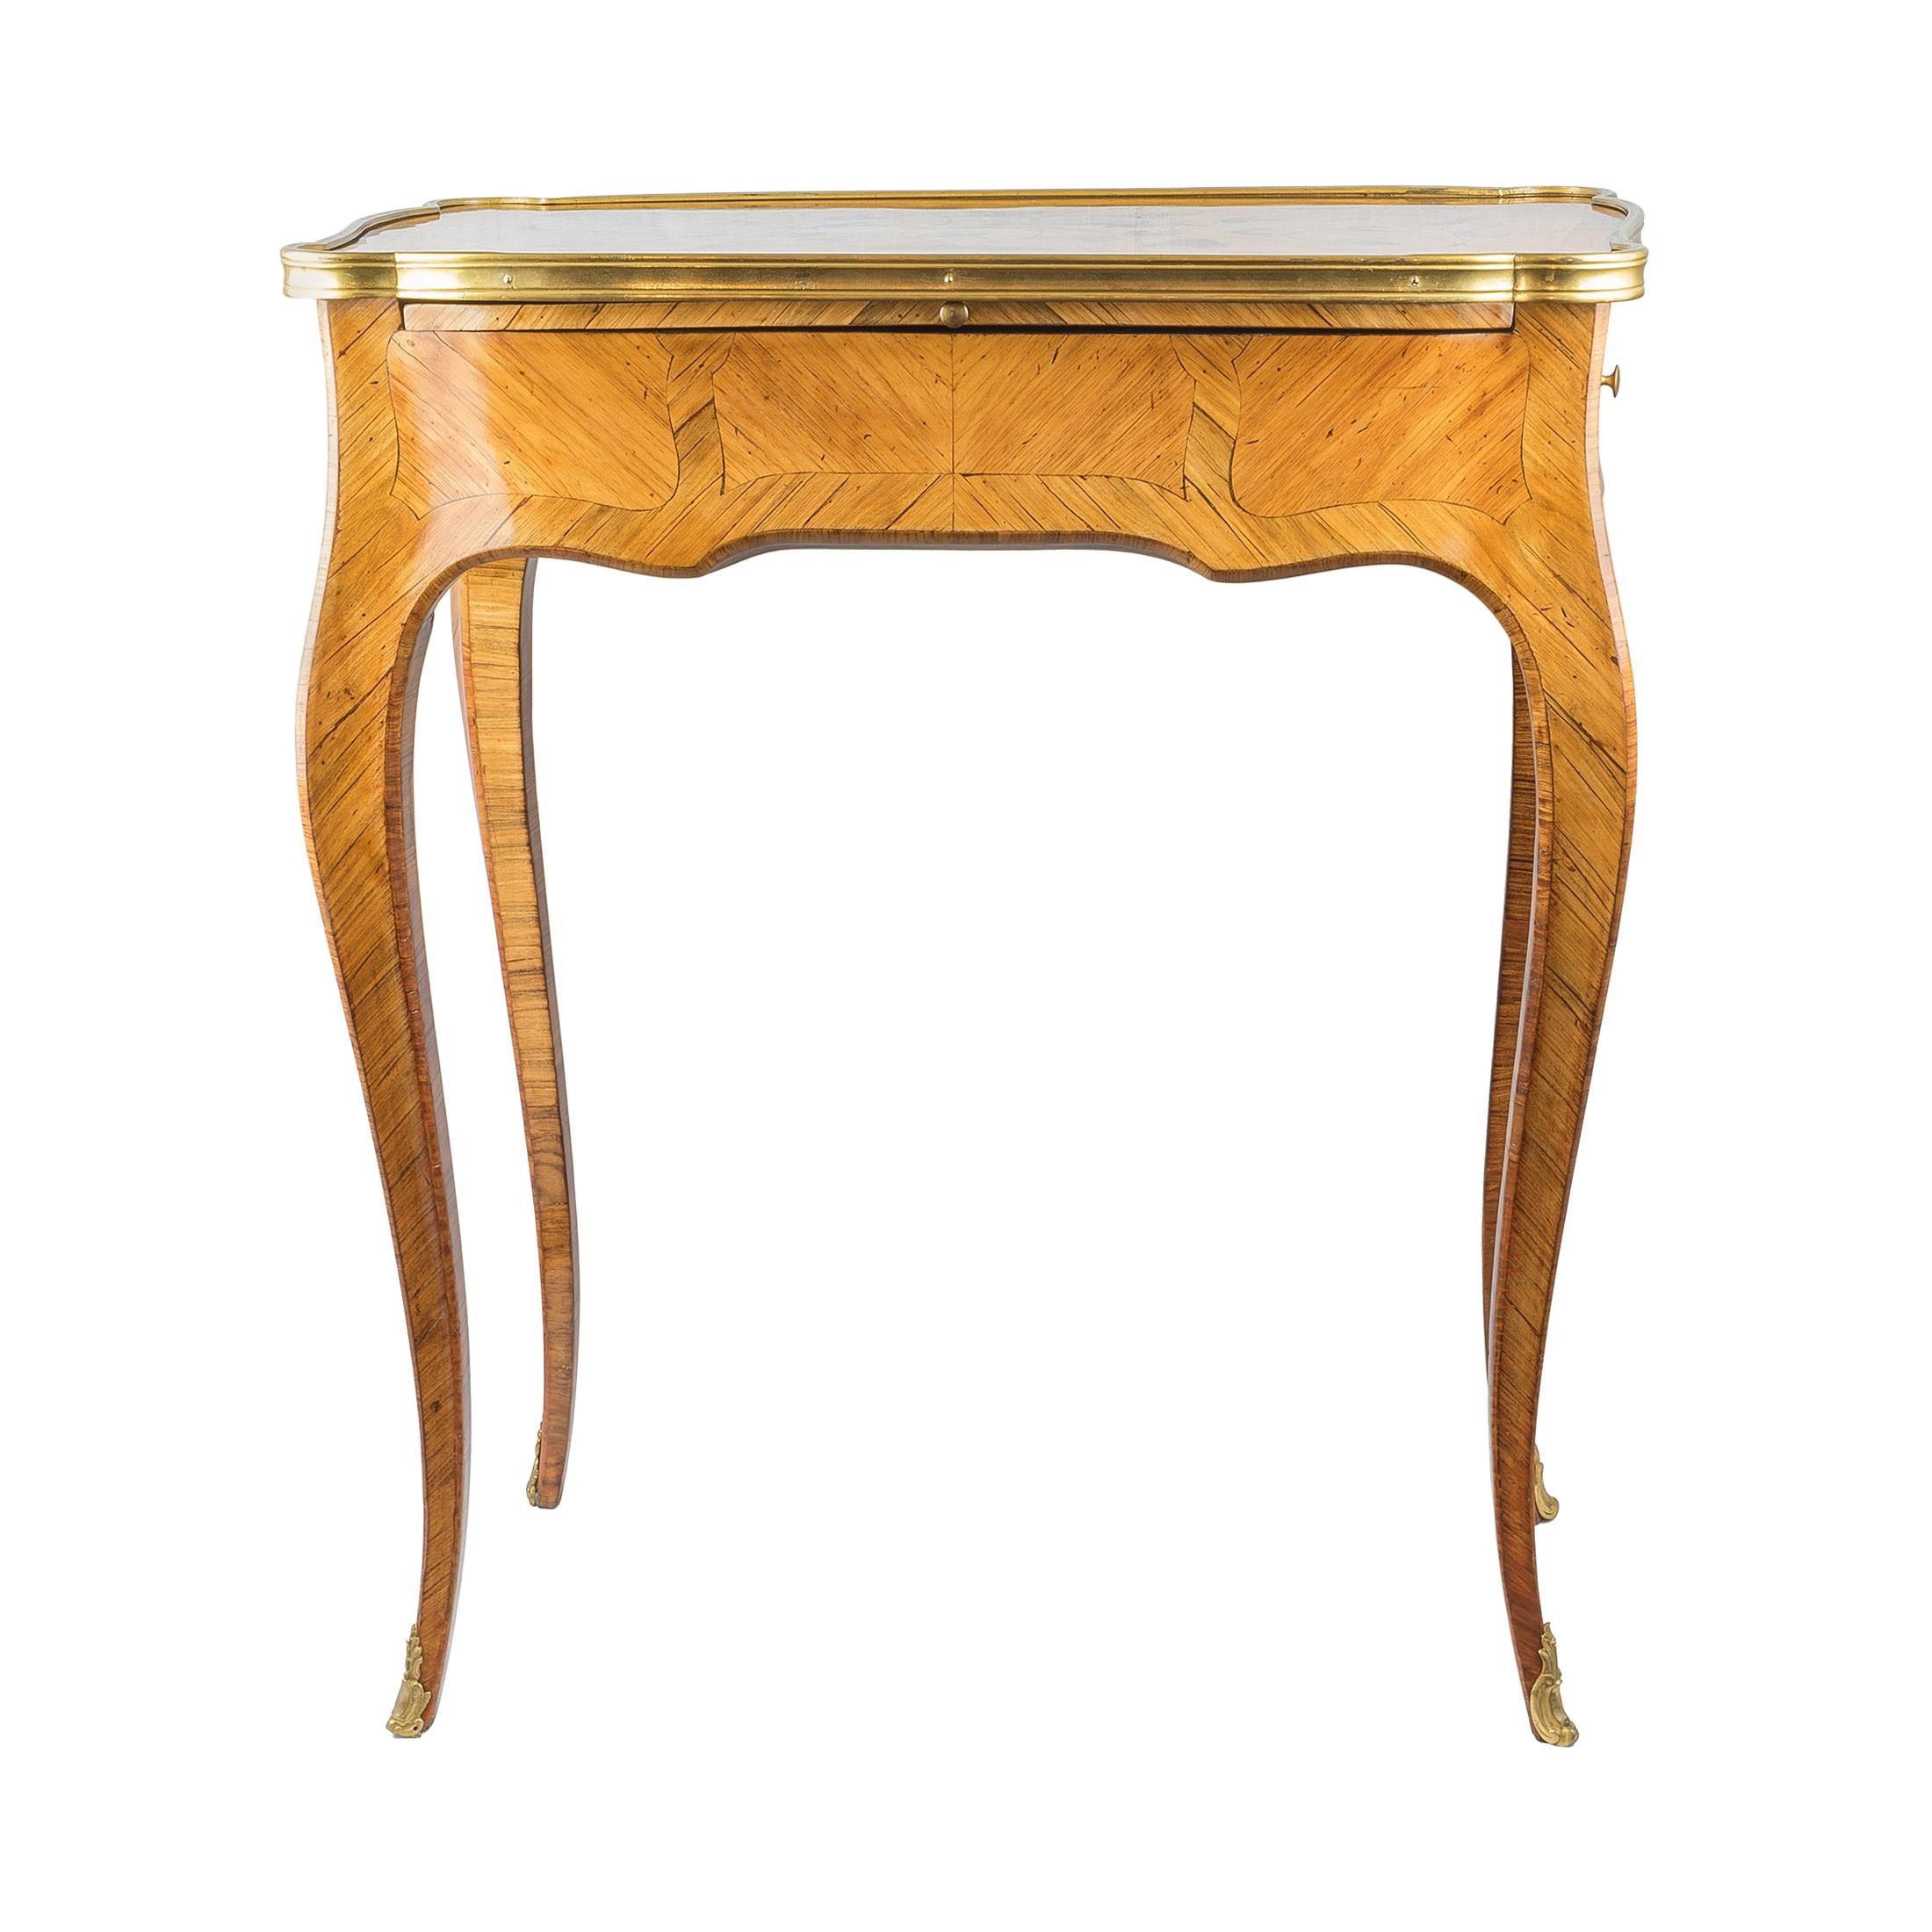 French Marquetry Kingwood Lacquered Rectangular Table For Sale